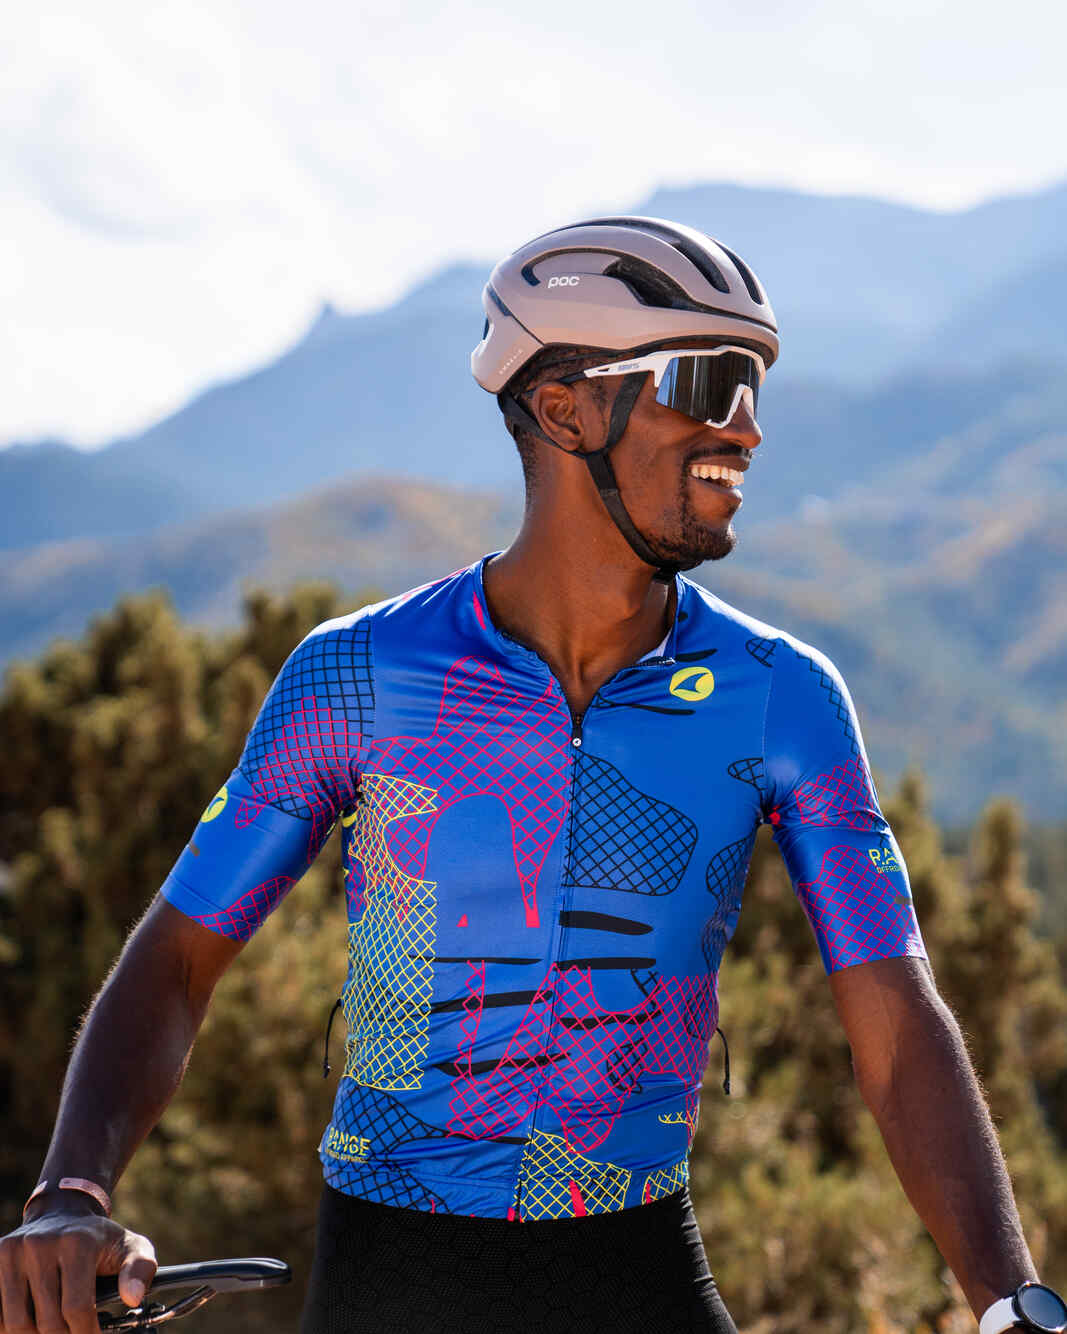 Men's Blue Gravel Cycling Jersey on Cyclist